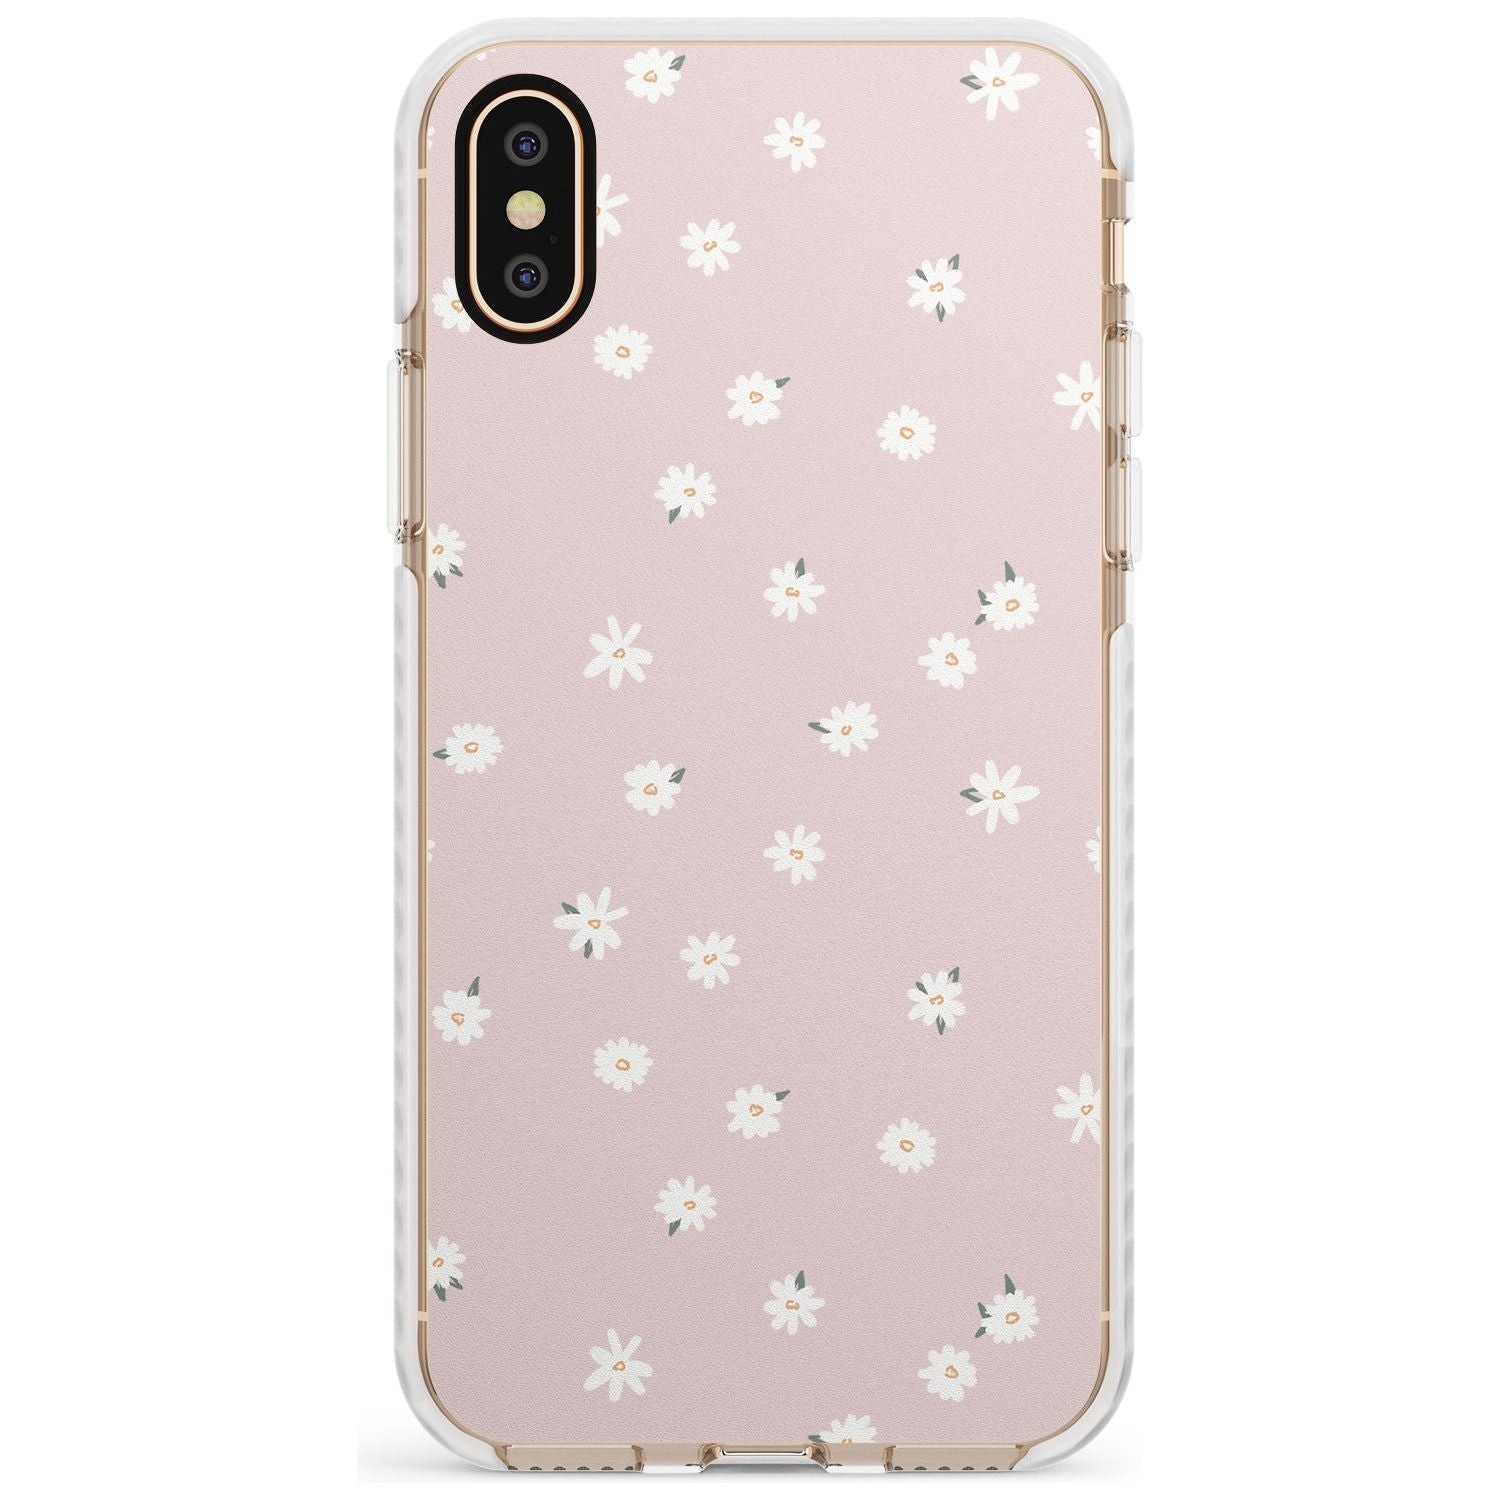 Painted Daises on Pink - Cute Floral Daisy Design Slim TPU Phone Case Warehouse X XS Max XR